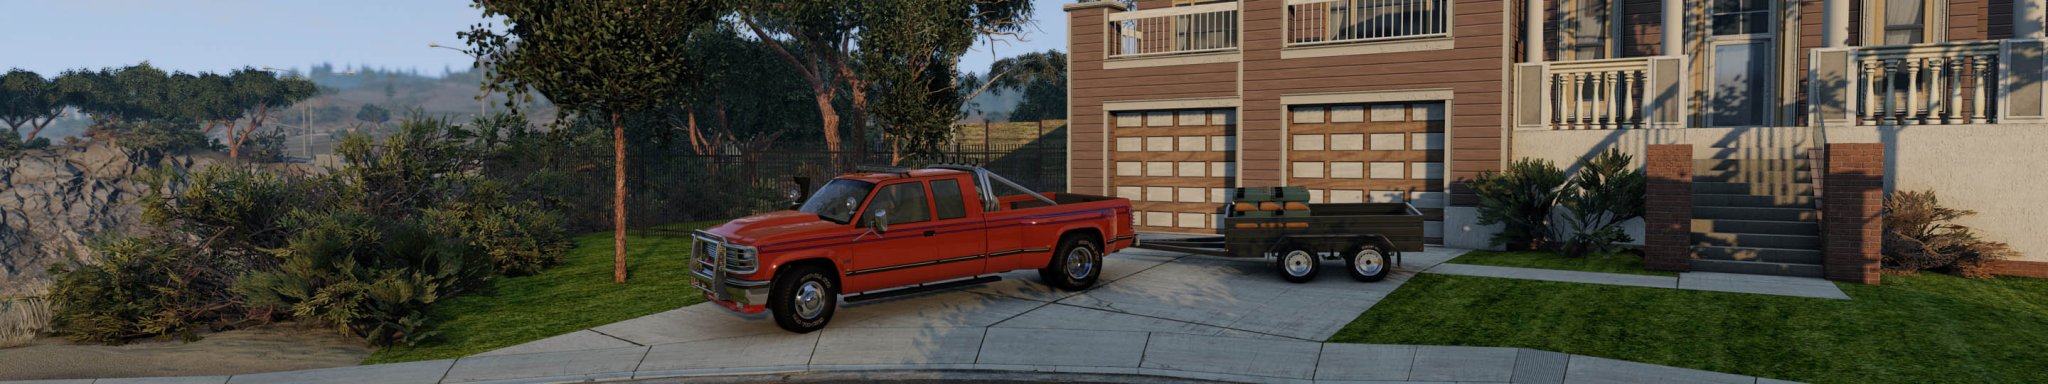 2 BeamNG Gavril D Series DUALLY with TRAILER at SEALBRIK Concrete Plant copy.jpg